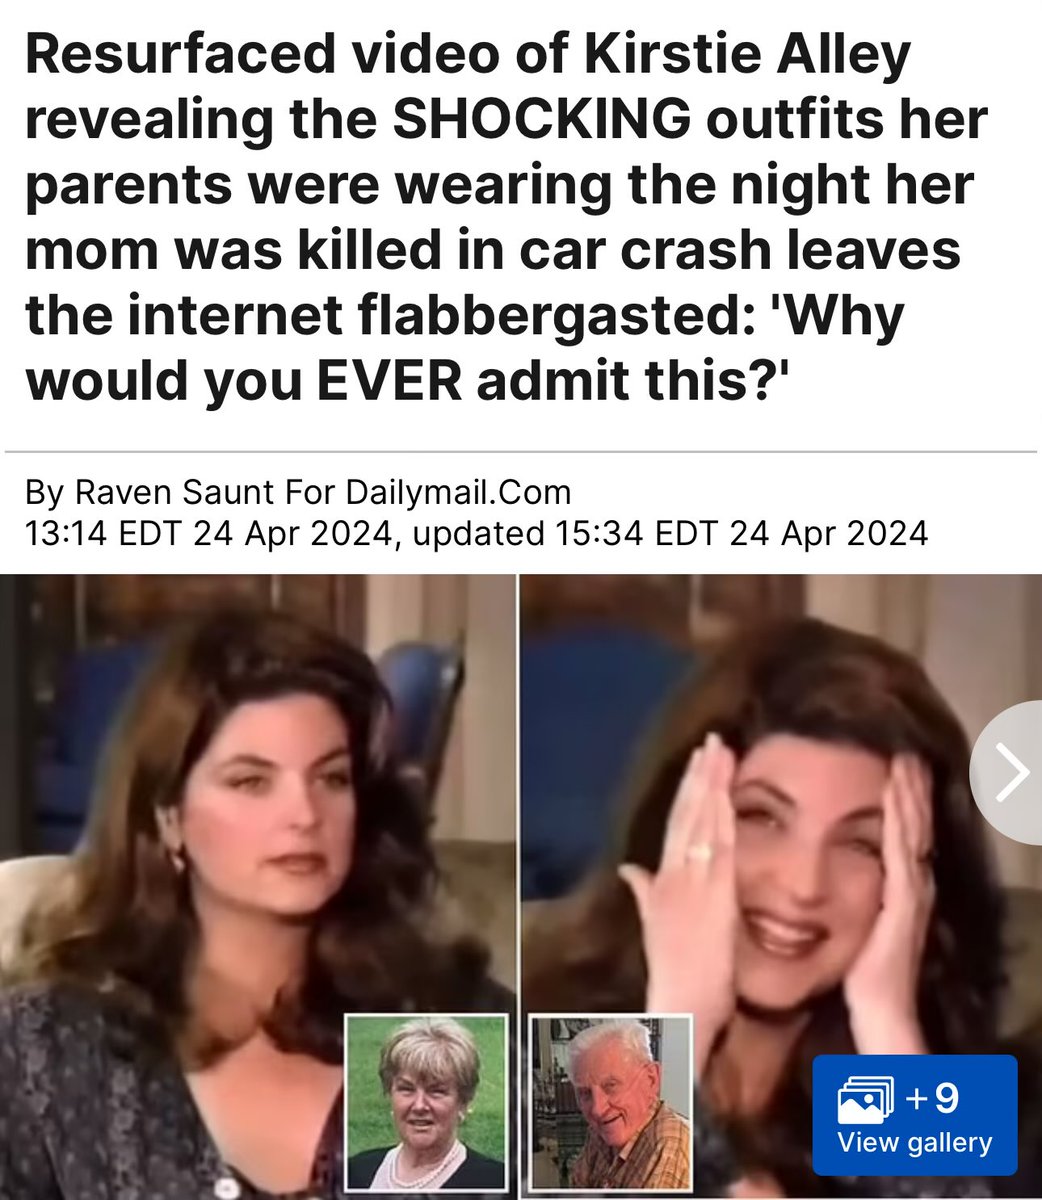 I clicked so you didn’t have to. Her parents were on their way to a Halloween party. Mom was dressed as a “little back girl” and her father was dressed as a member of the KKK. Yikes.